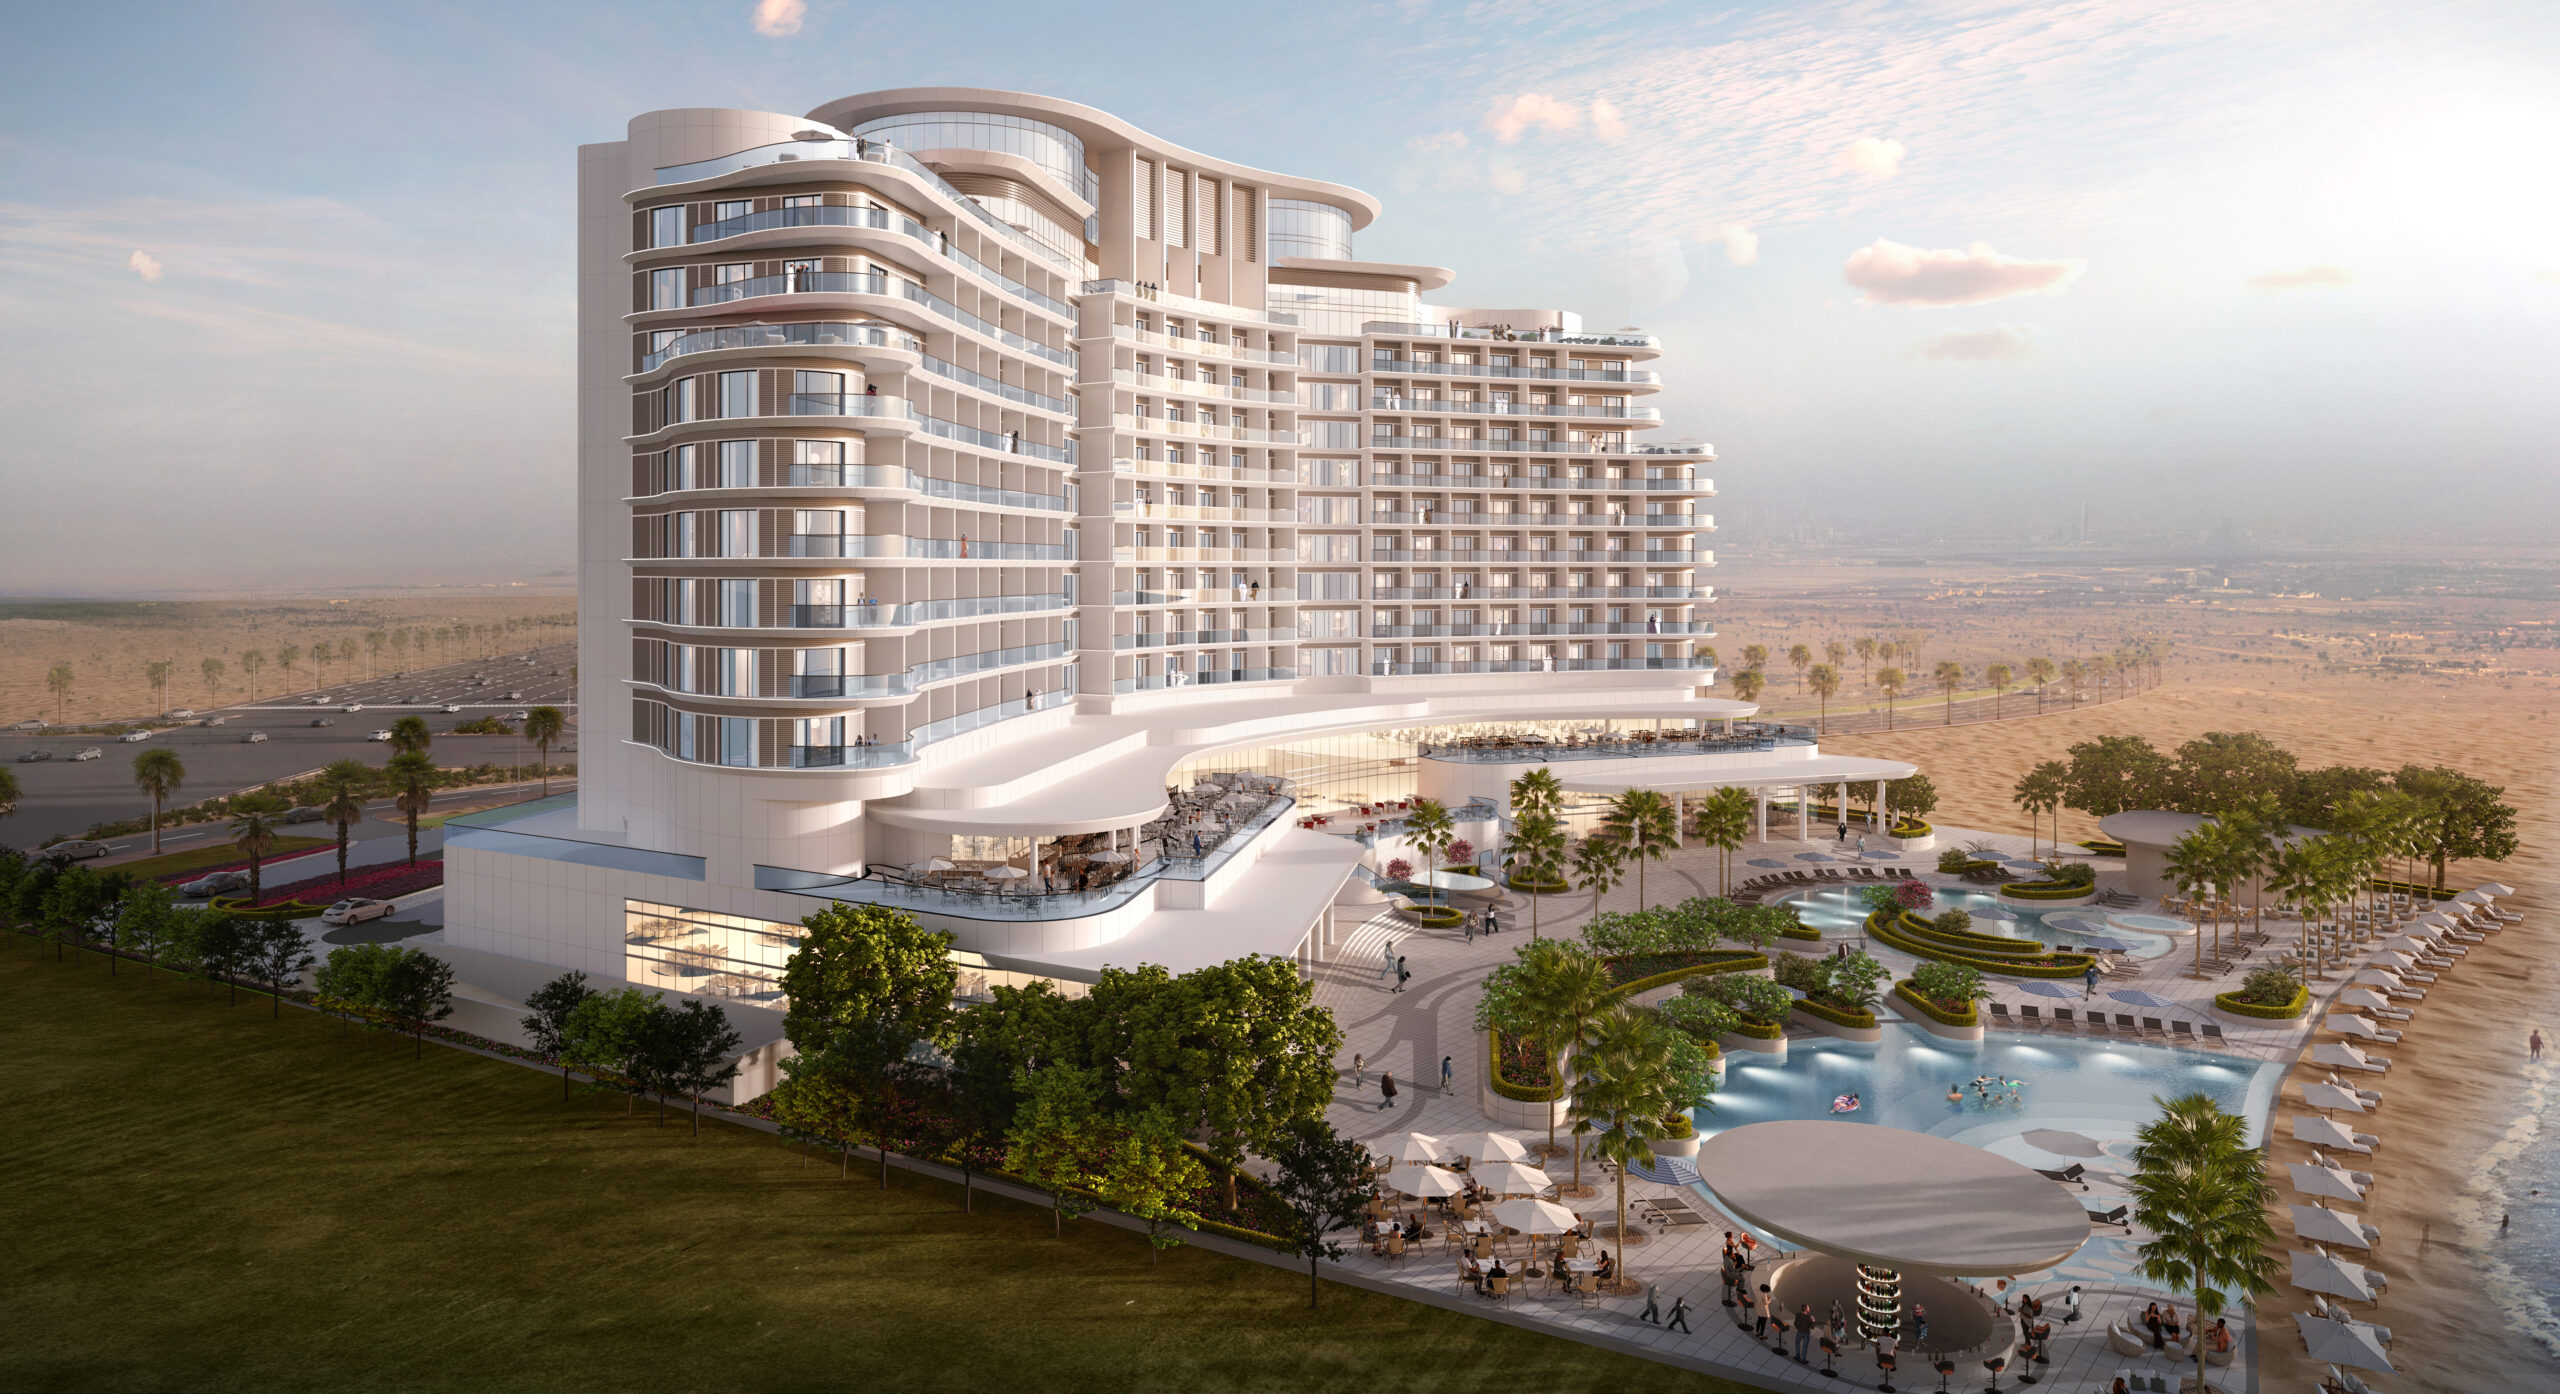 Marriott International and Three Musketeers Hospitality Collaborates to Bring Le Méridien Hotels & Resorts to Ras Al Khaimah’s Al Marjan Island